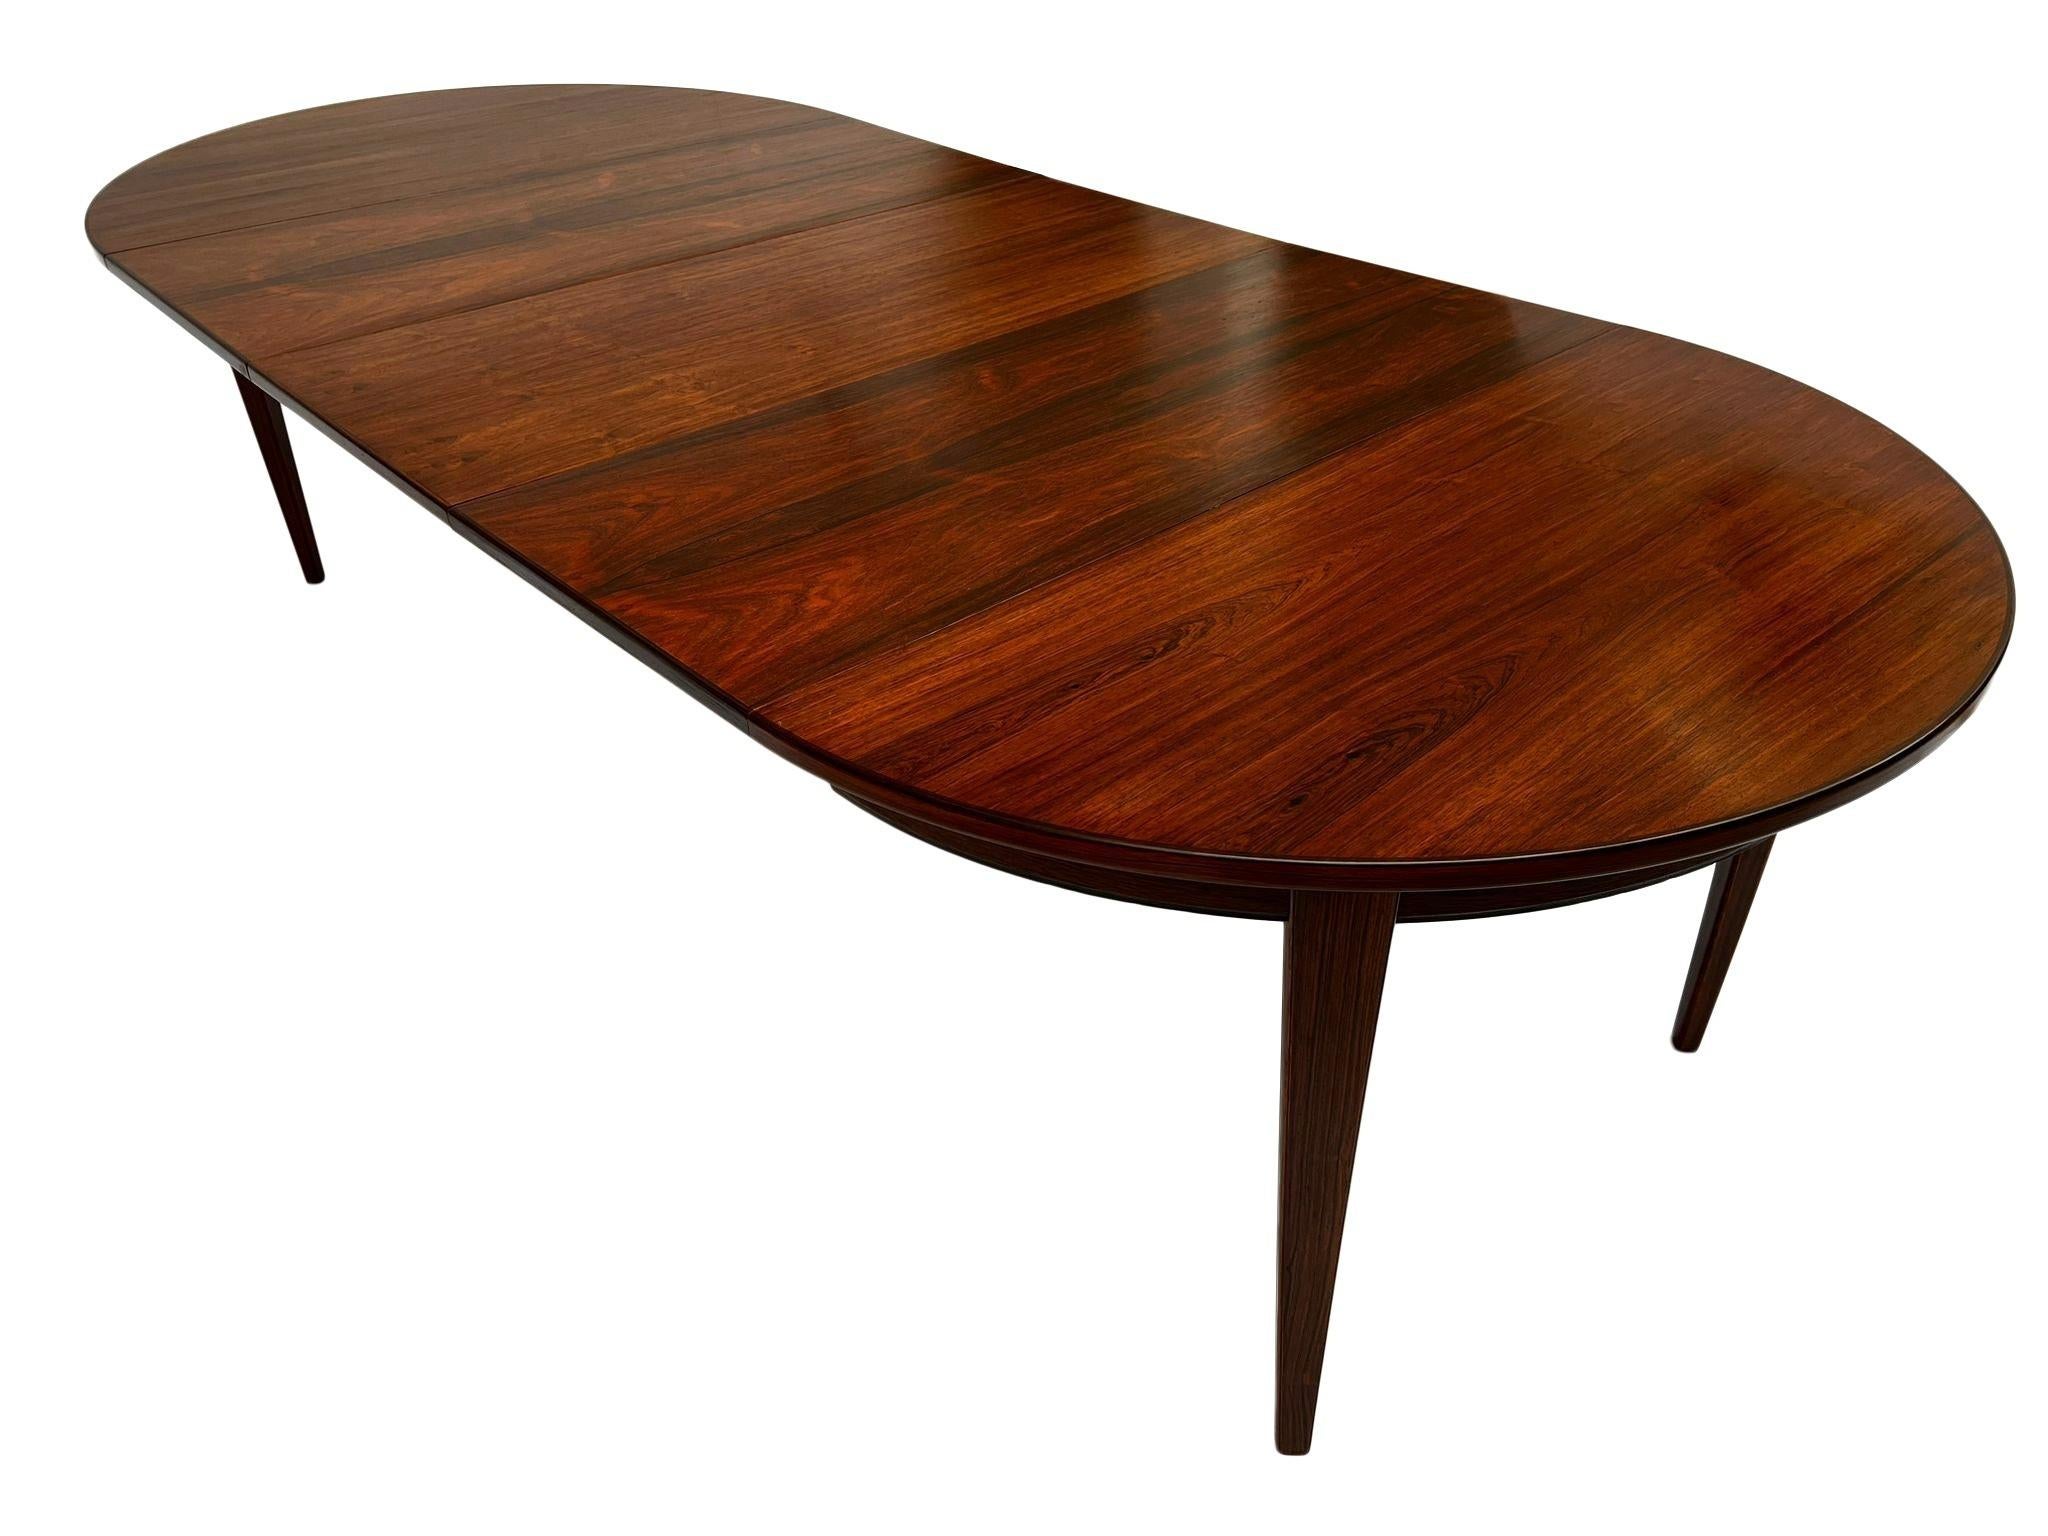 A beautiful Danish Model 55 rosewood dining table designed by Gunni Omann for Omann Jun Møbelfabrik, this would make a stylish addition to any dining or work area. A striking piece of classically designed Scandinavian furniture.

The table has